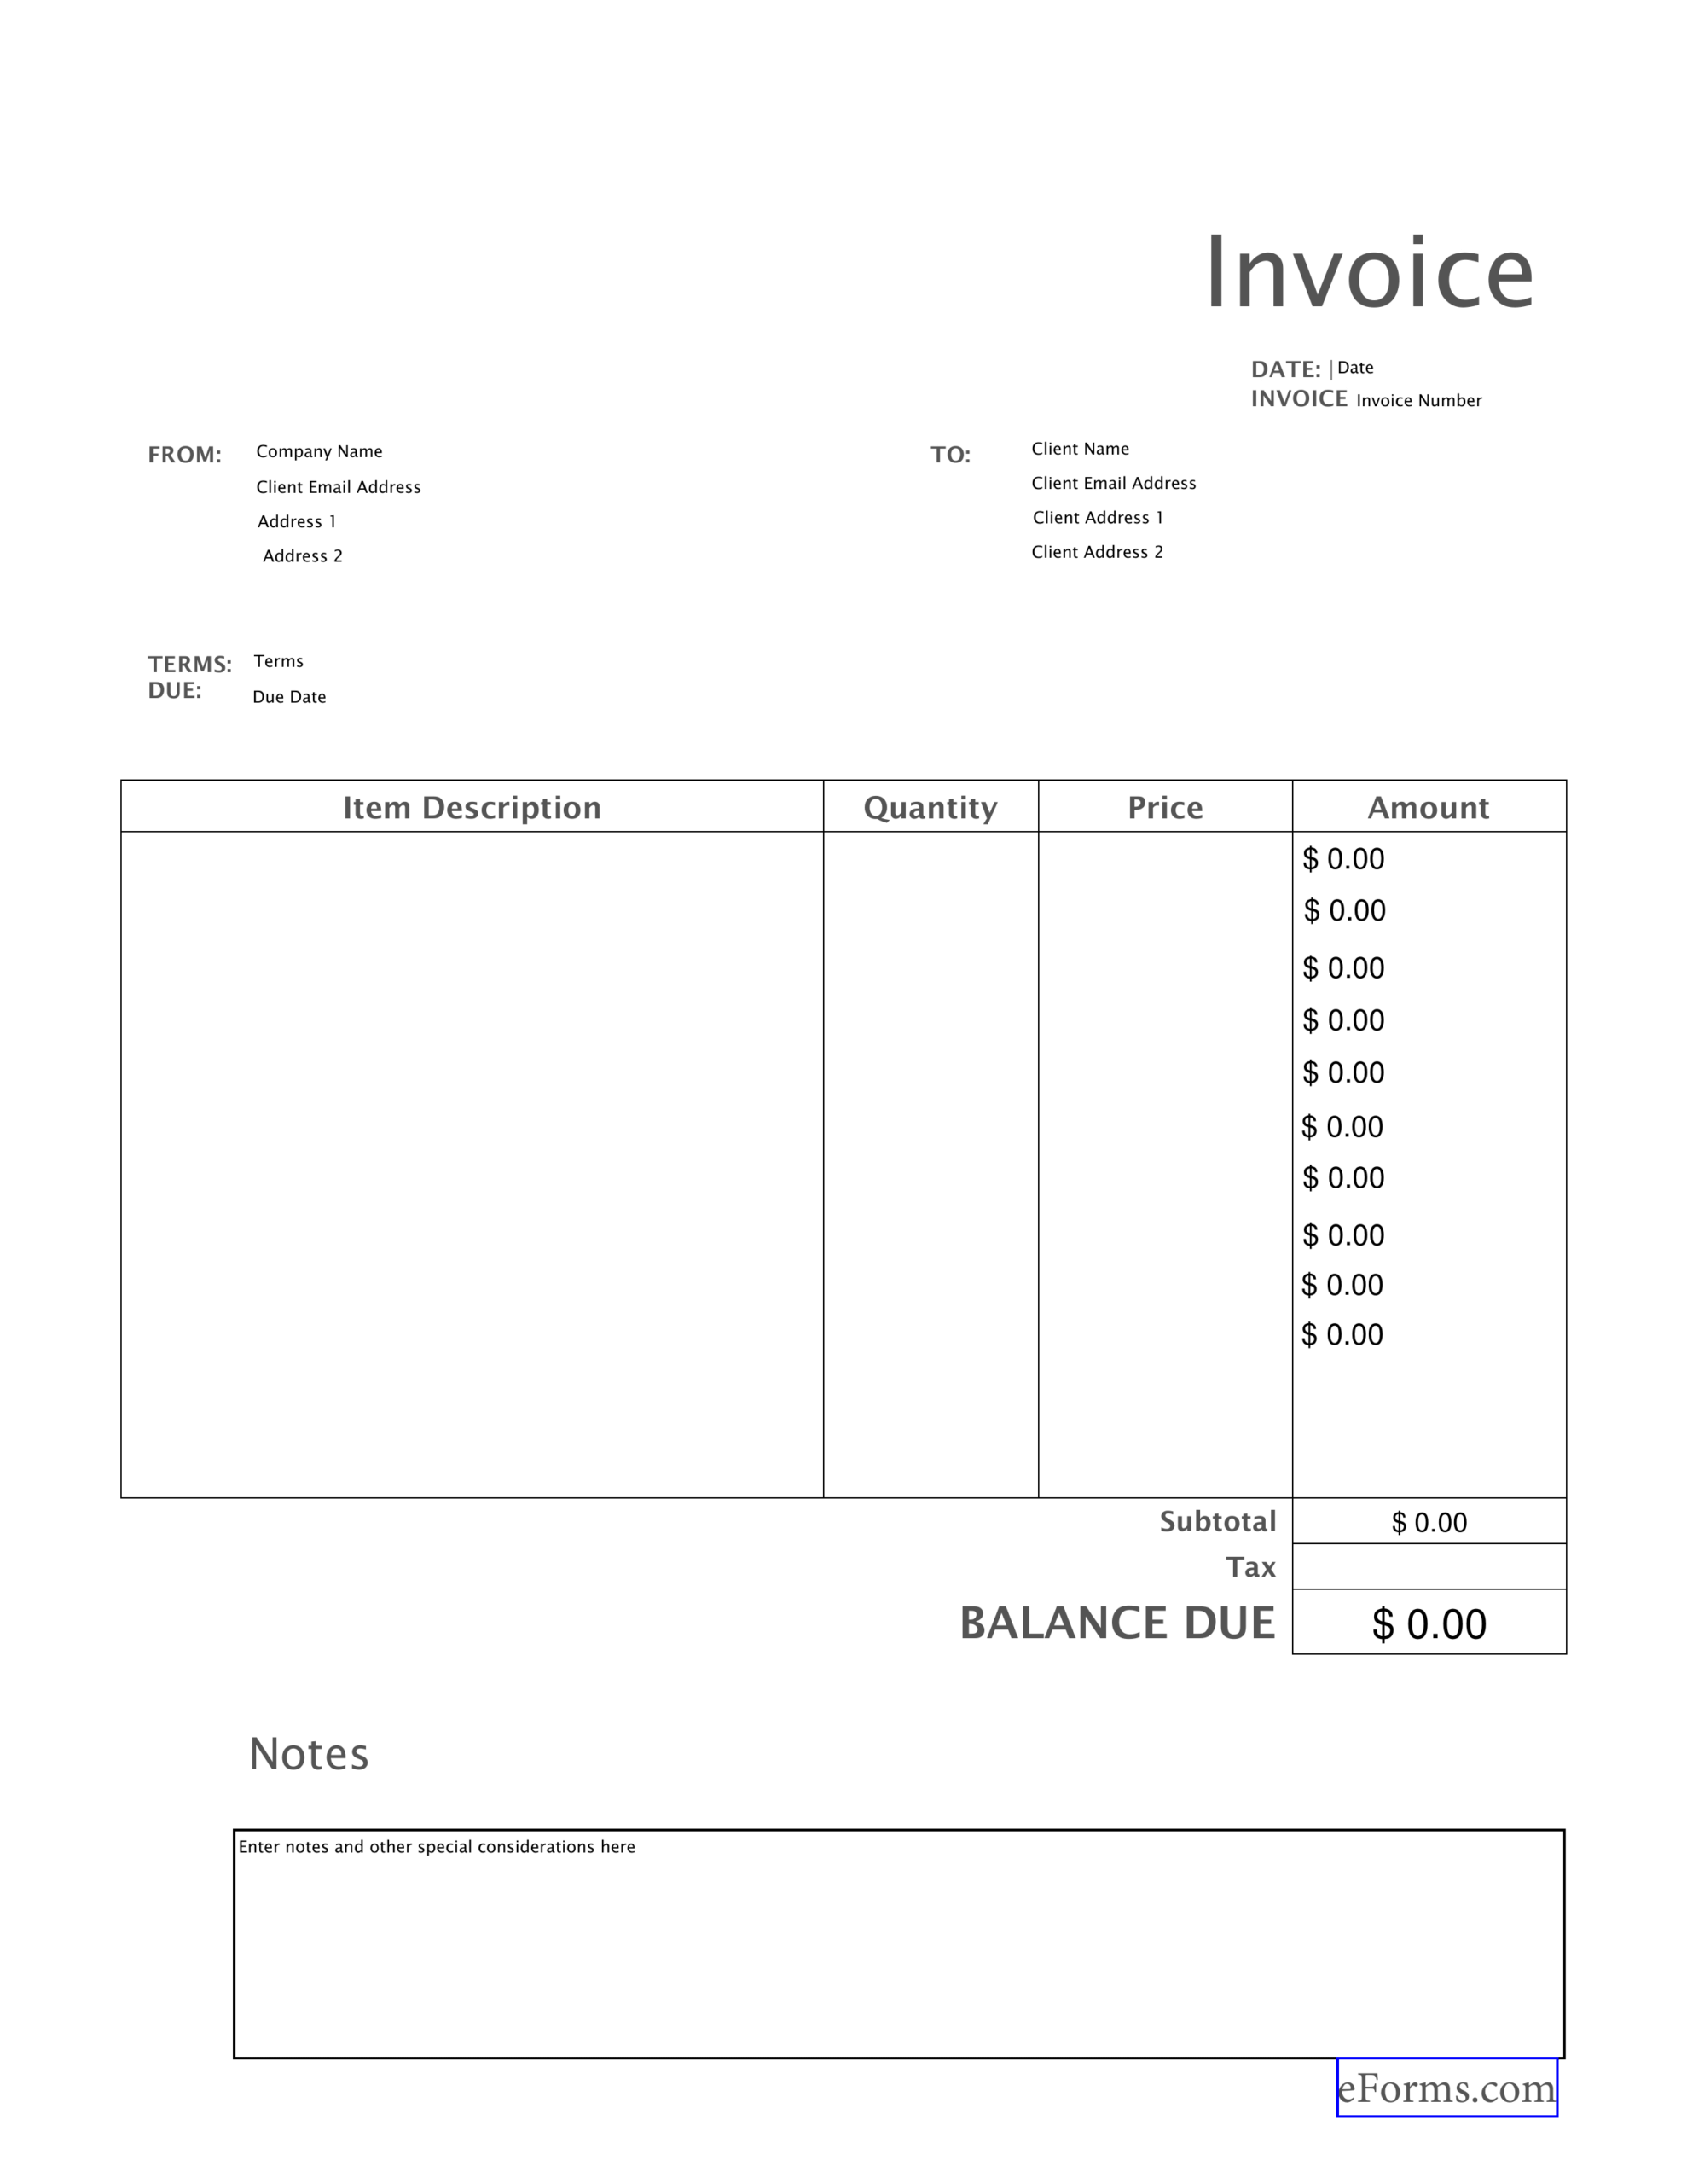 Free Blank Invoice Templates – Pdf | Eforms – Free Fillable In 1099 Invoice Template